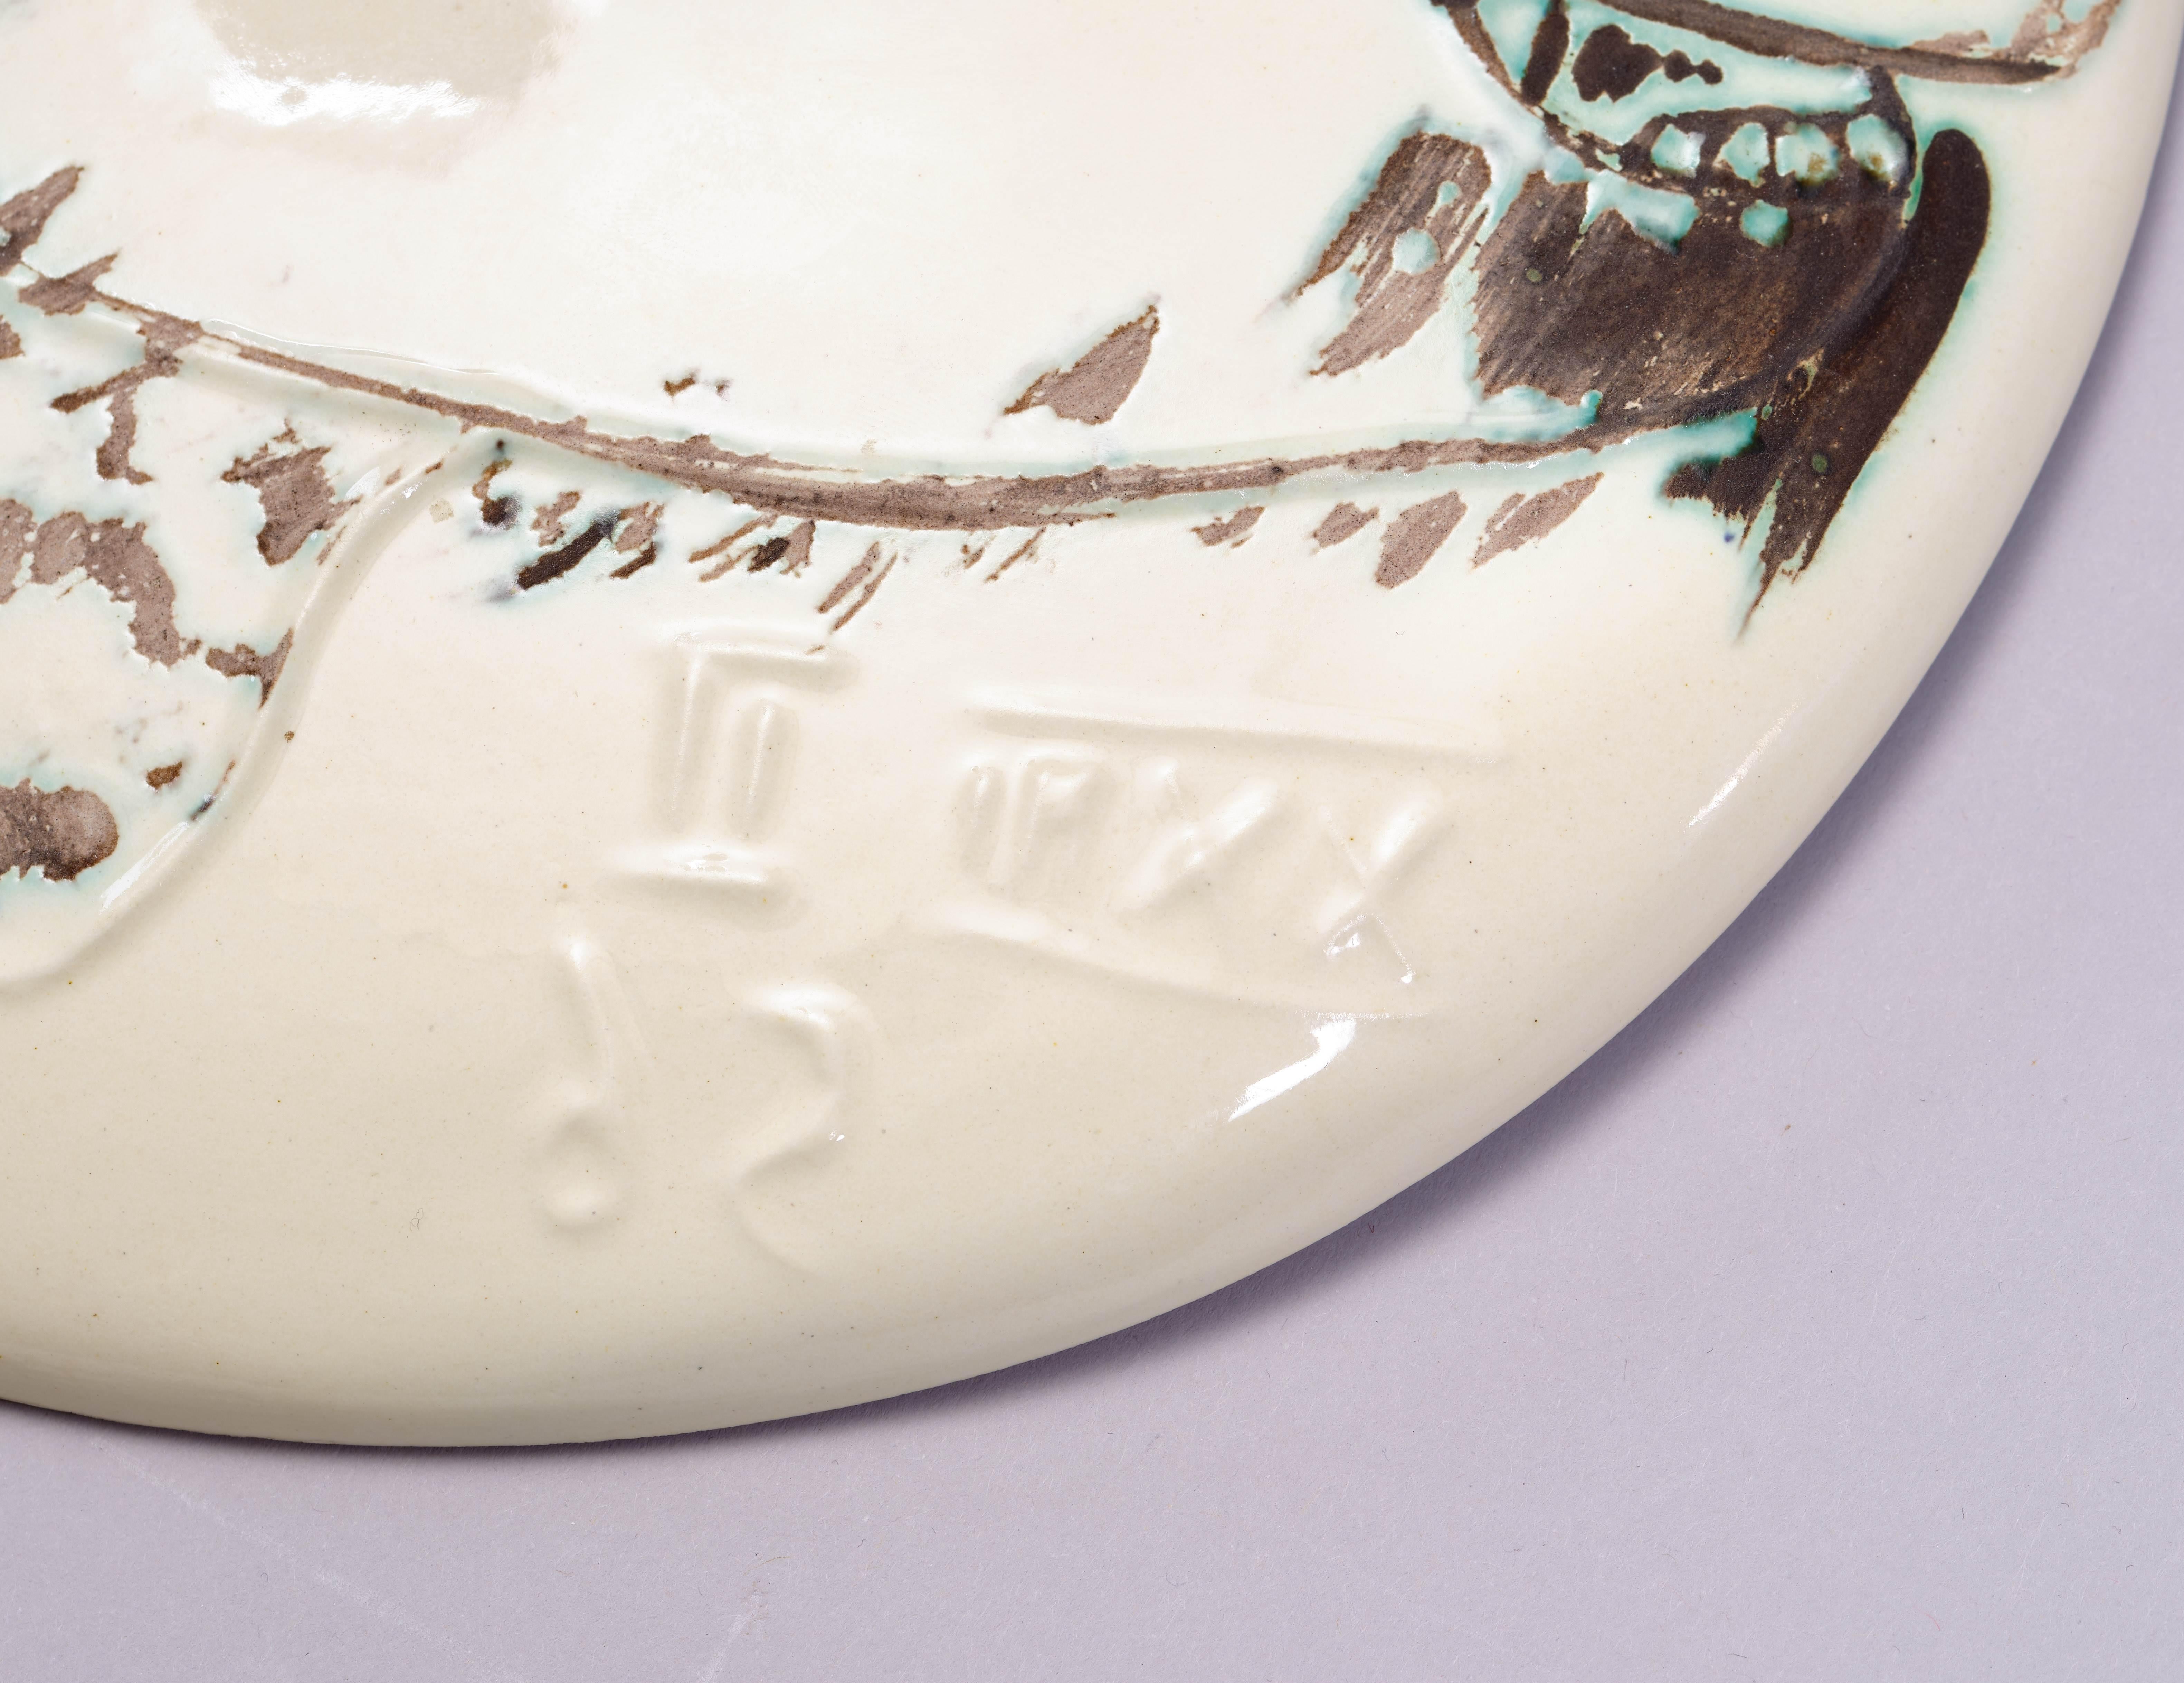 Ceramic plate painted in green, brown and ivory, 1956. Decorated with engraving and oxidised paraffin. From the edition of 450. Incised with the mirror-inverted date XXII II 56 lower right. Stamped MADOURA PLEIN FEU and EMPREINTE ORIGINALE DE